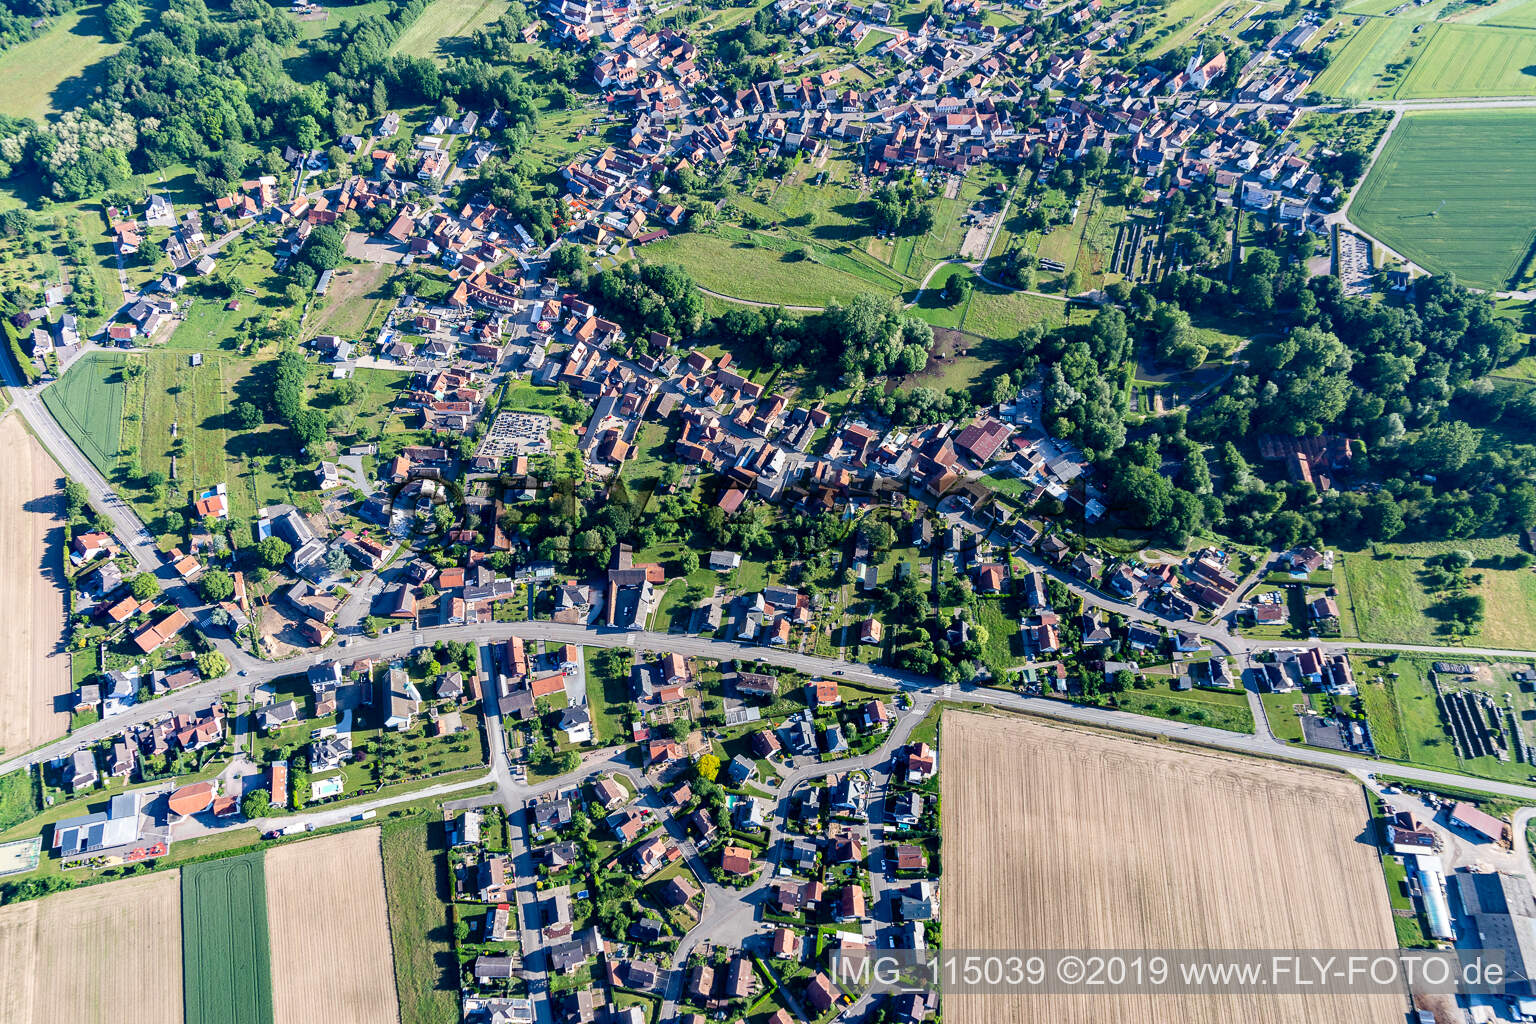 Drone image of Scheibenhard in the state Bas-Rhin, France